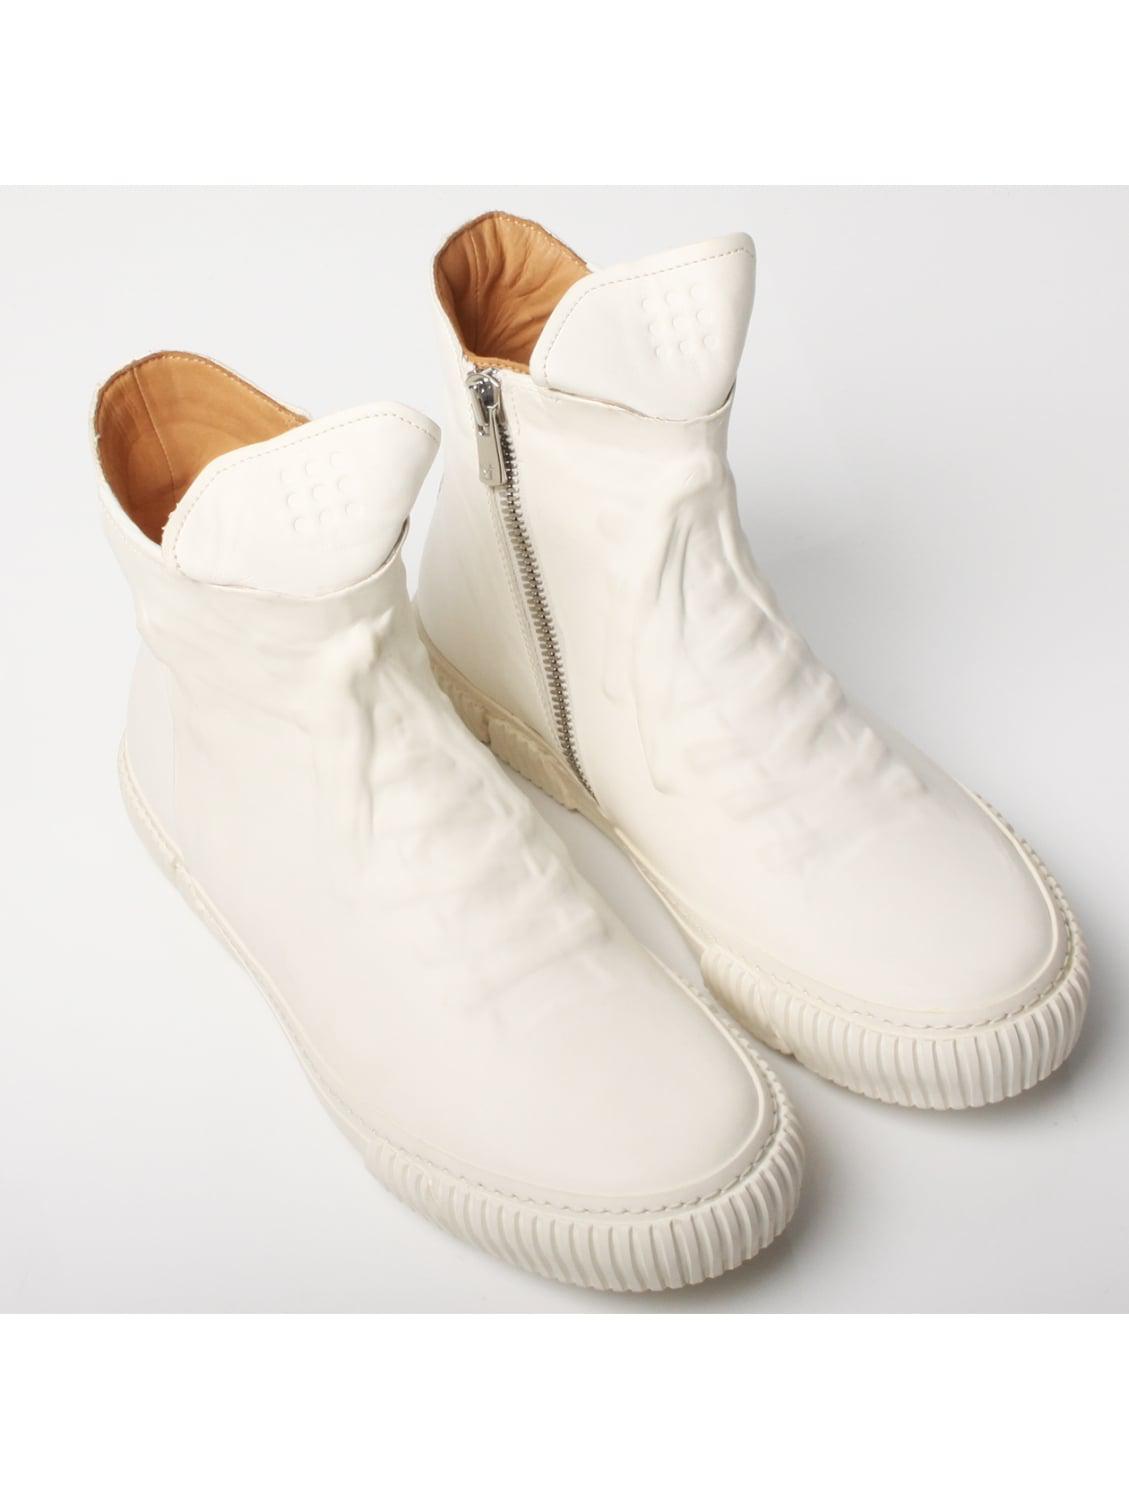 Lyst - BOTH Paris Rubber Foxing High Top White in White for Men